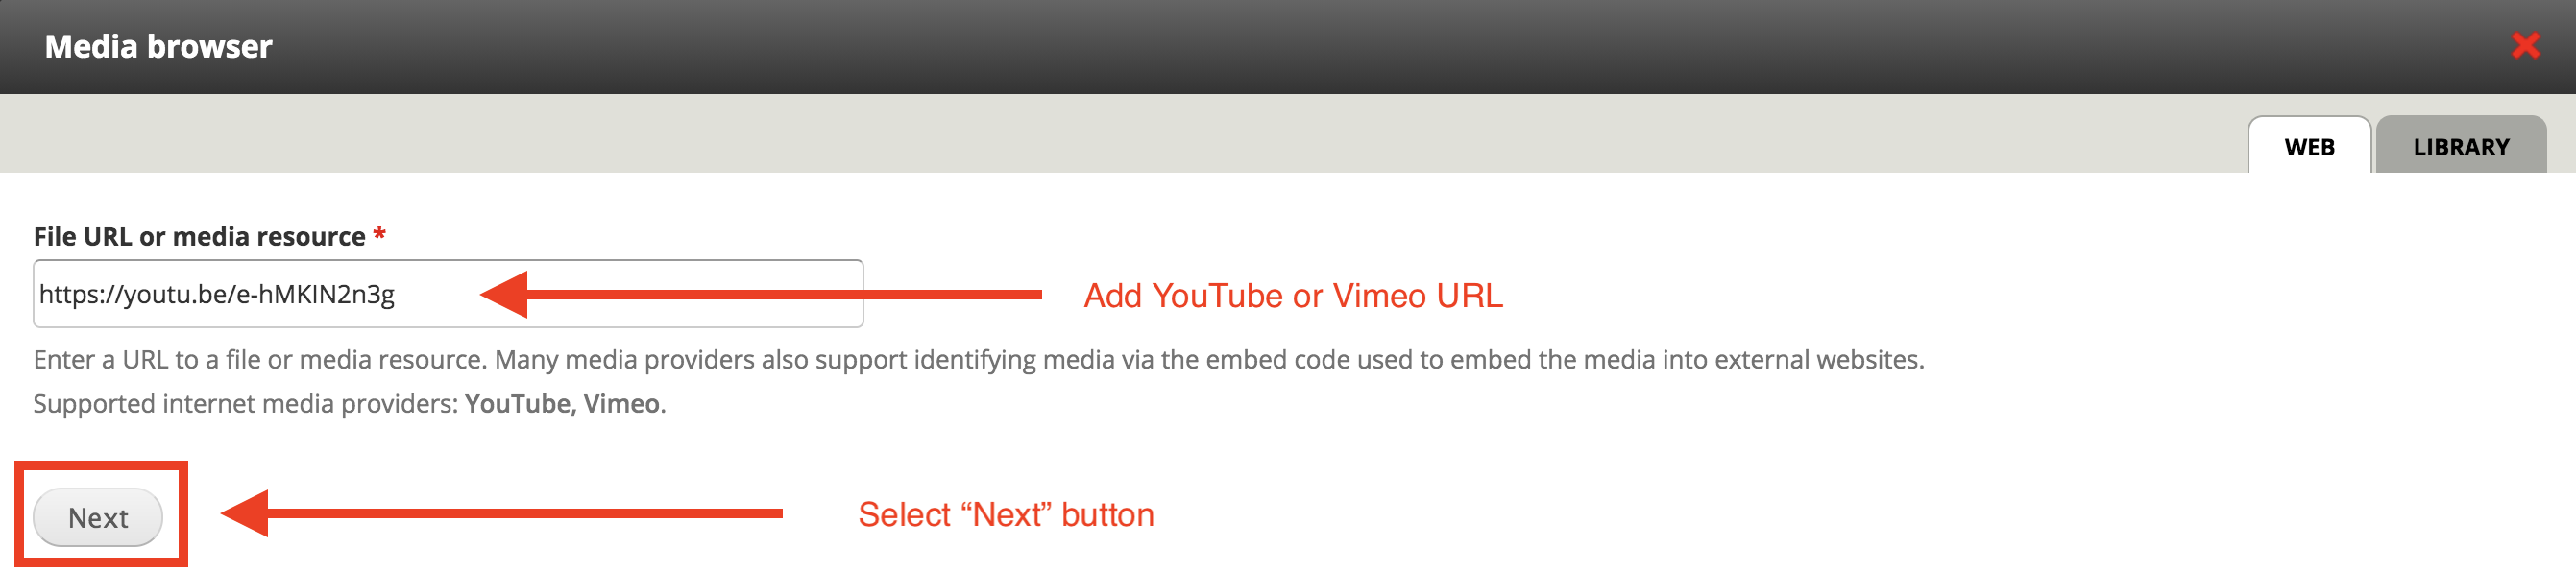 Screenshot of media browser modal, with YouTube URL in the "file URL or media resource" field